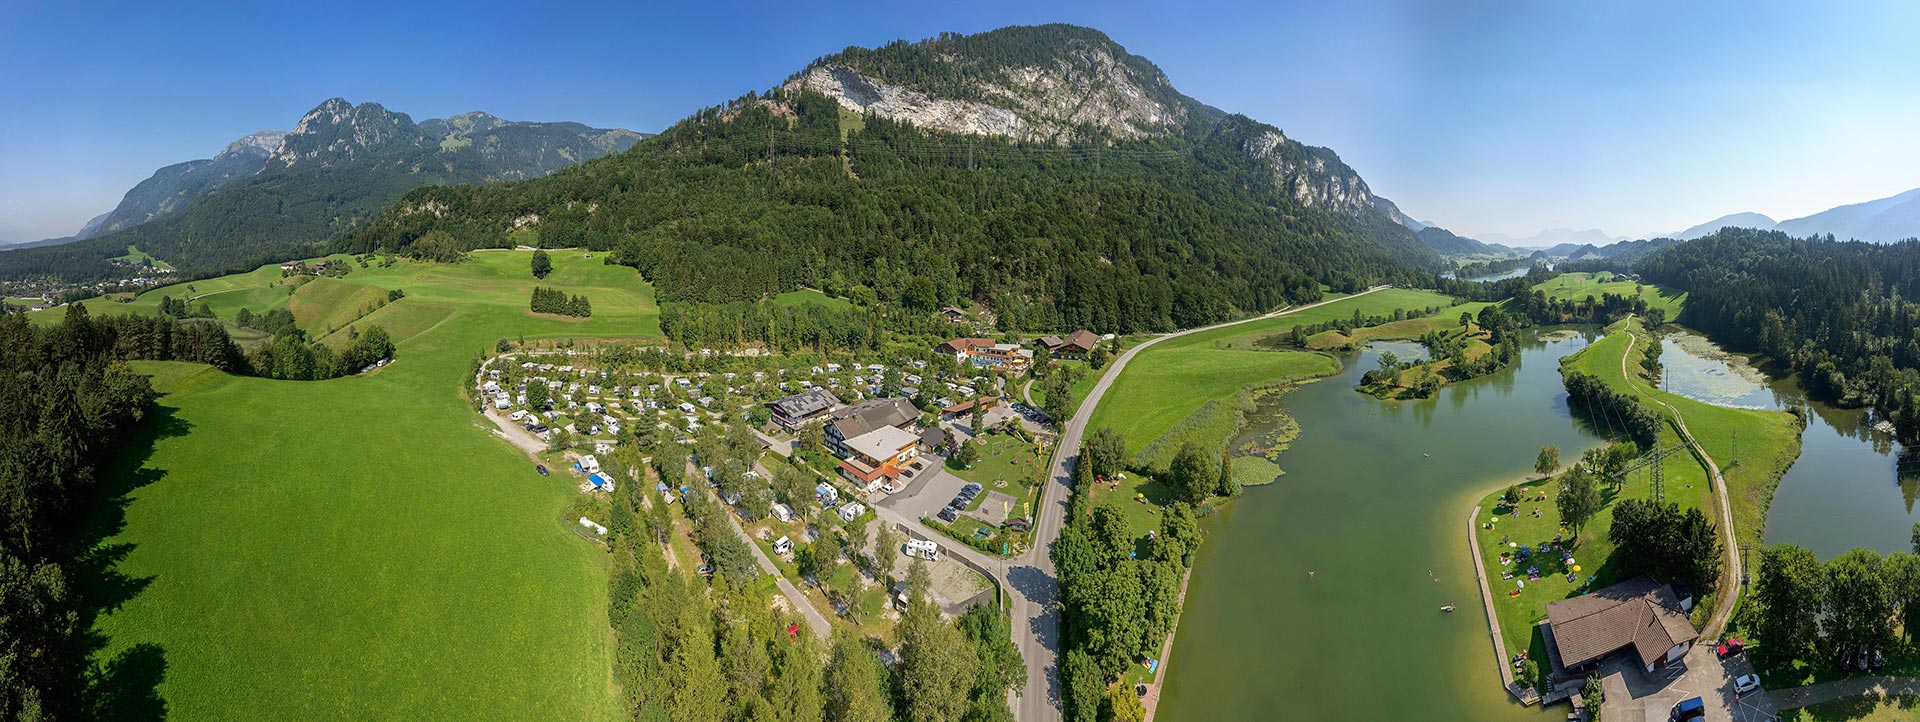 Camping Stadlerhof - a holiday with the Sappl family at the foot of the Alps – main image